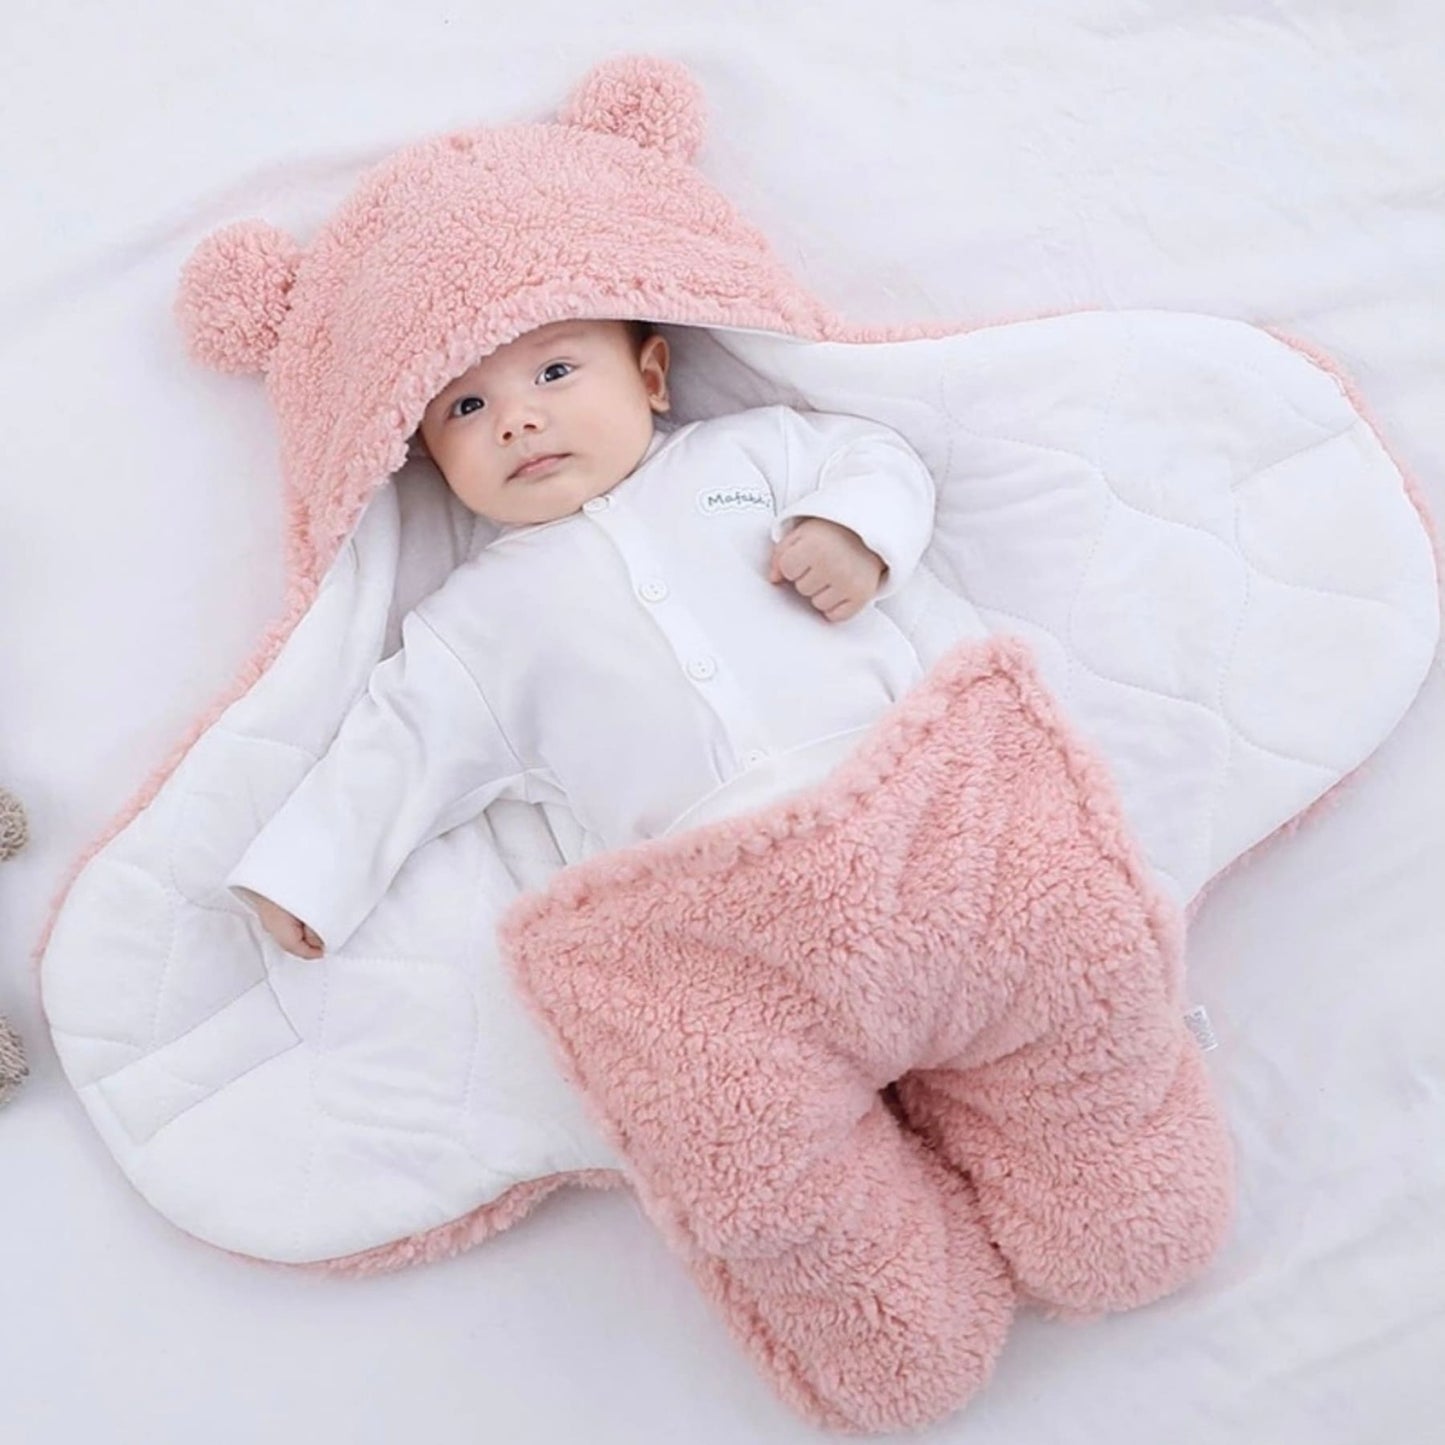 Baby in pink baby sleeping bag and swaddle for winter - hunny bubba kids